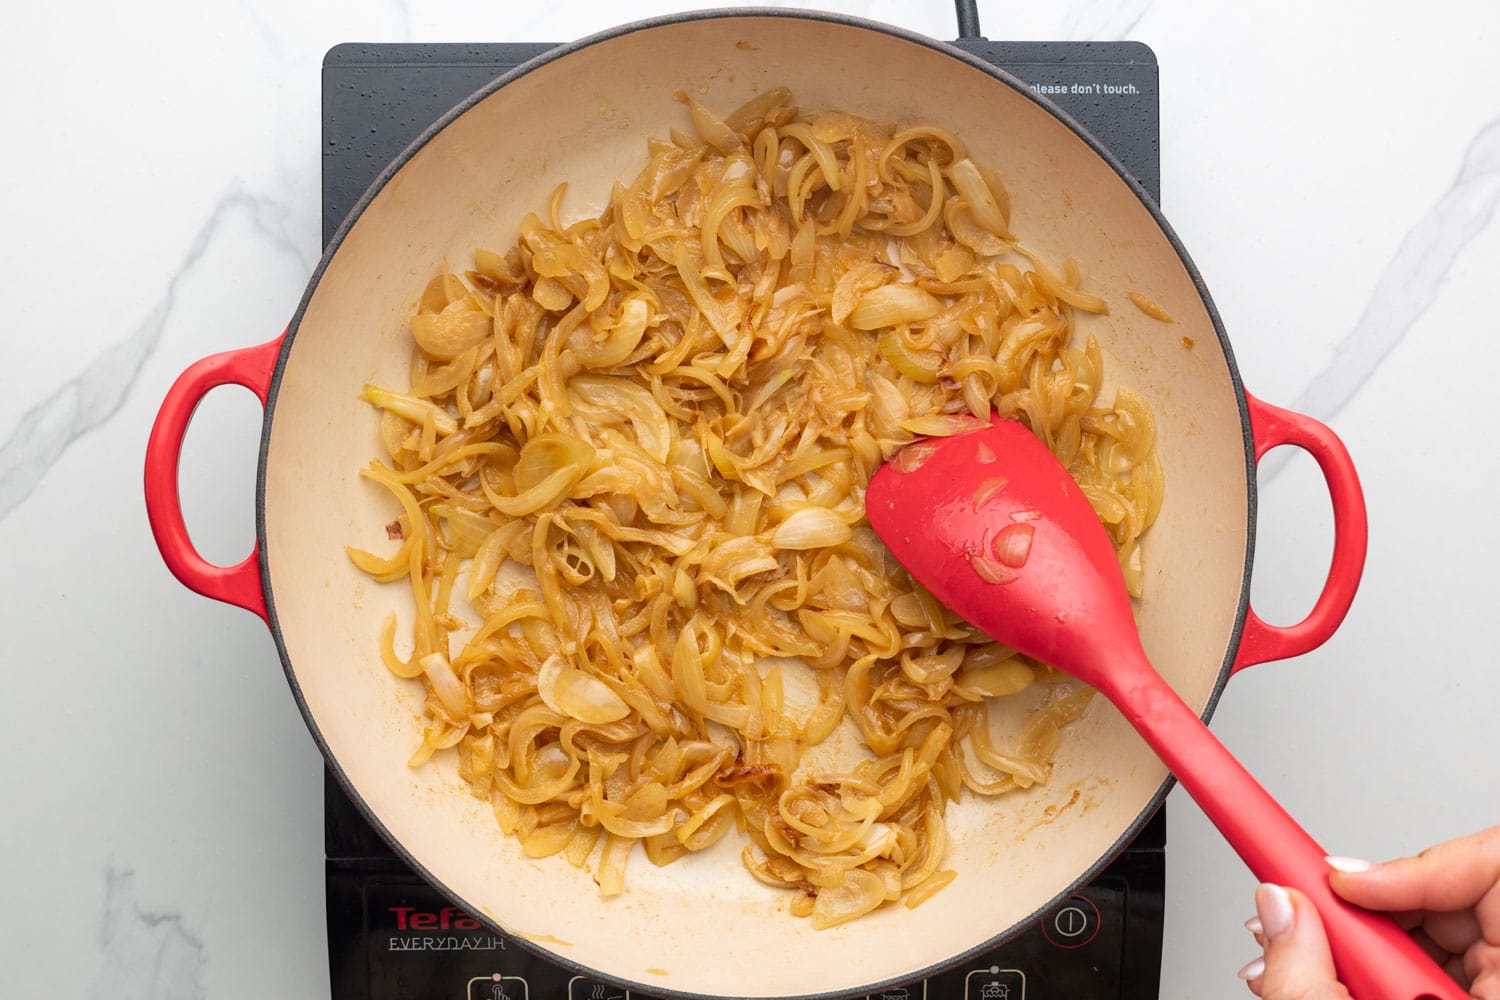 brown caramelized onions in an enameled skillet, stirred with a red spoon.